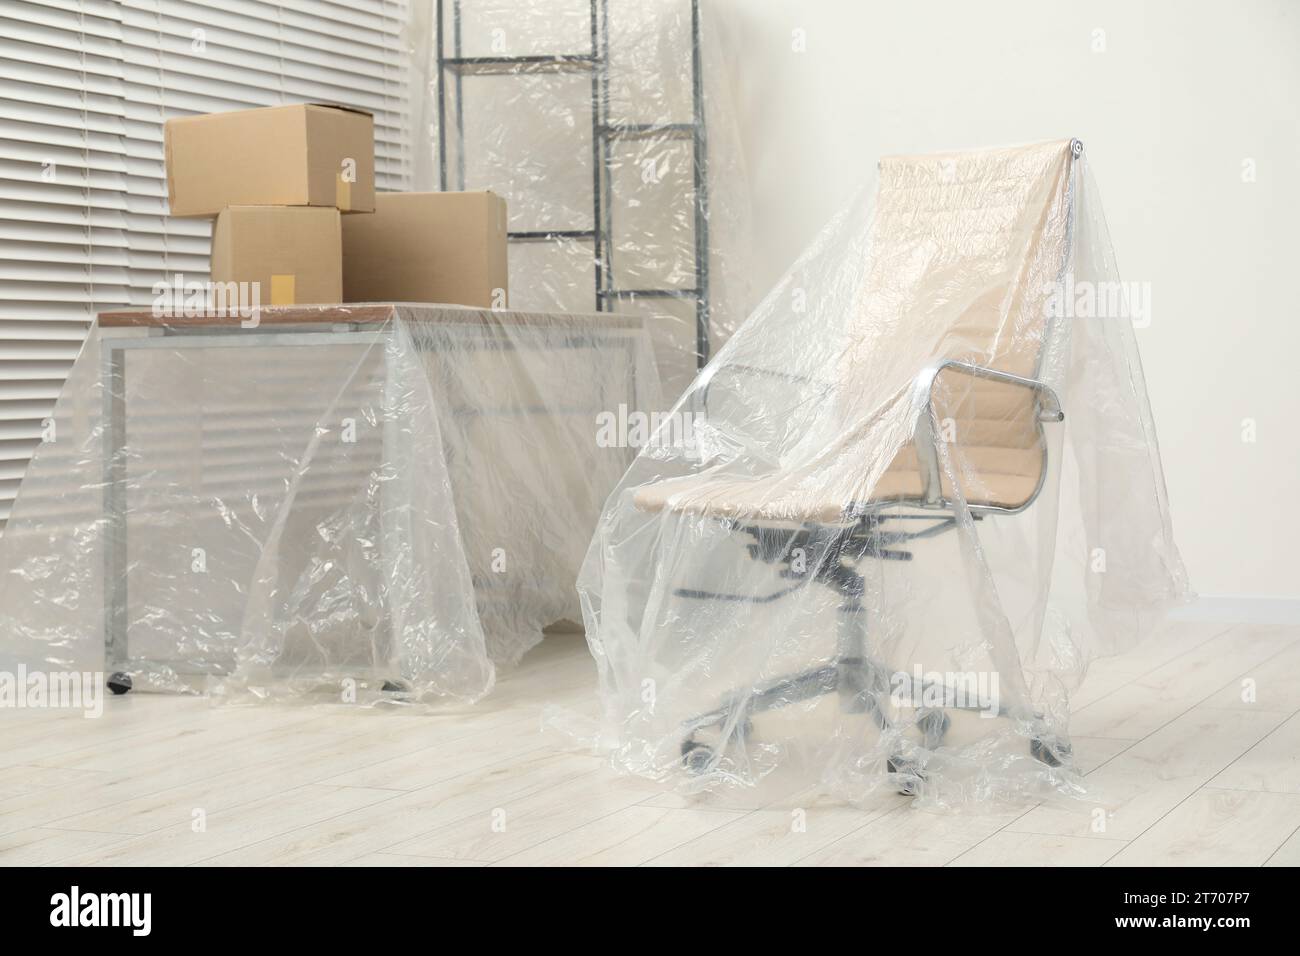 Modern furniture covered with plastic film and boxes at home Stock Photo